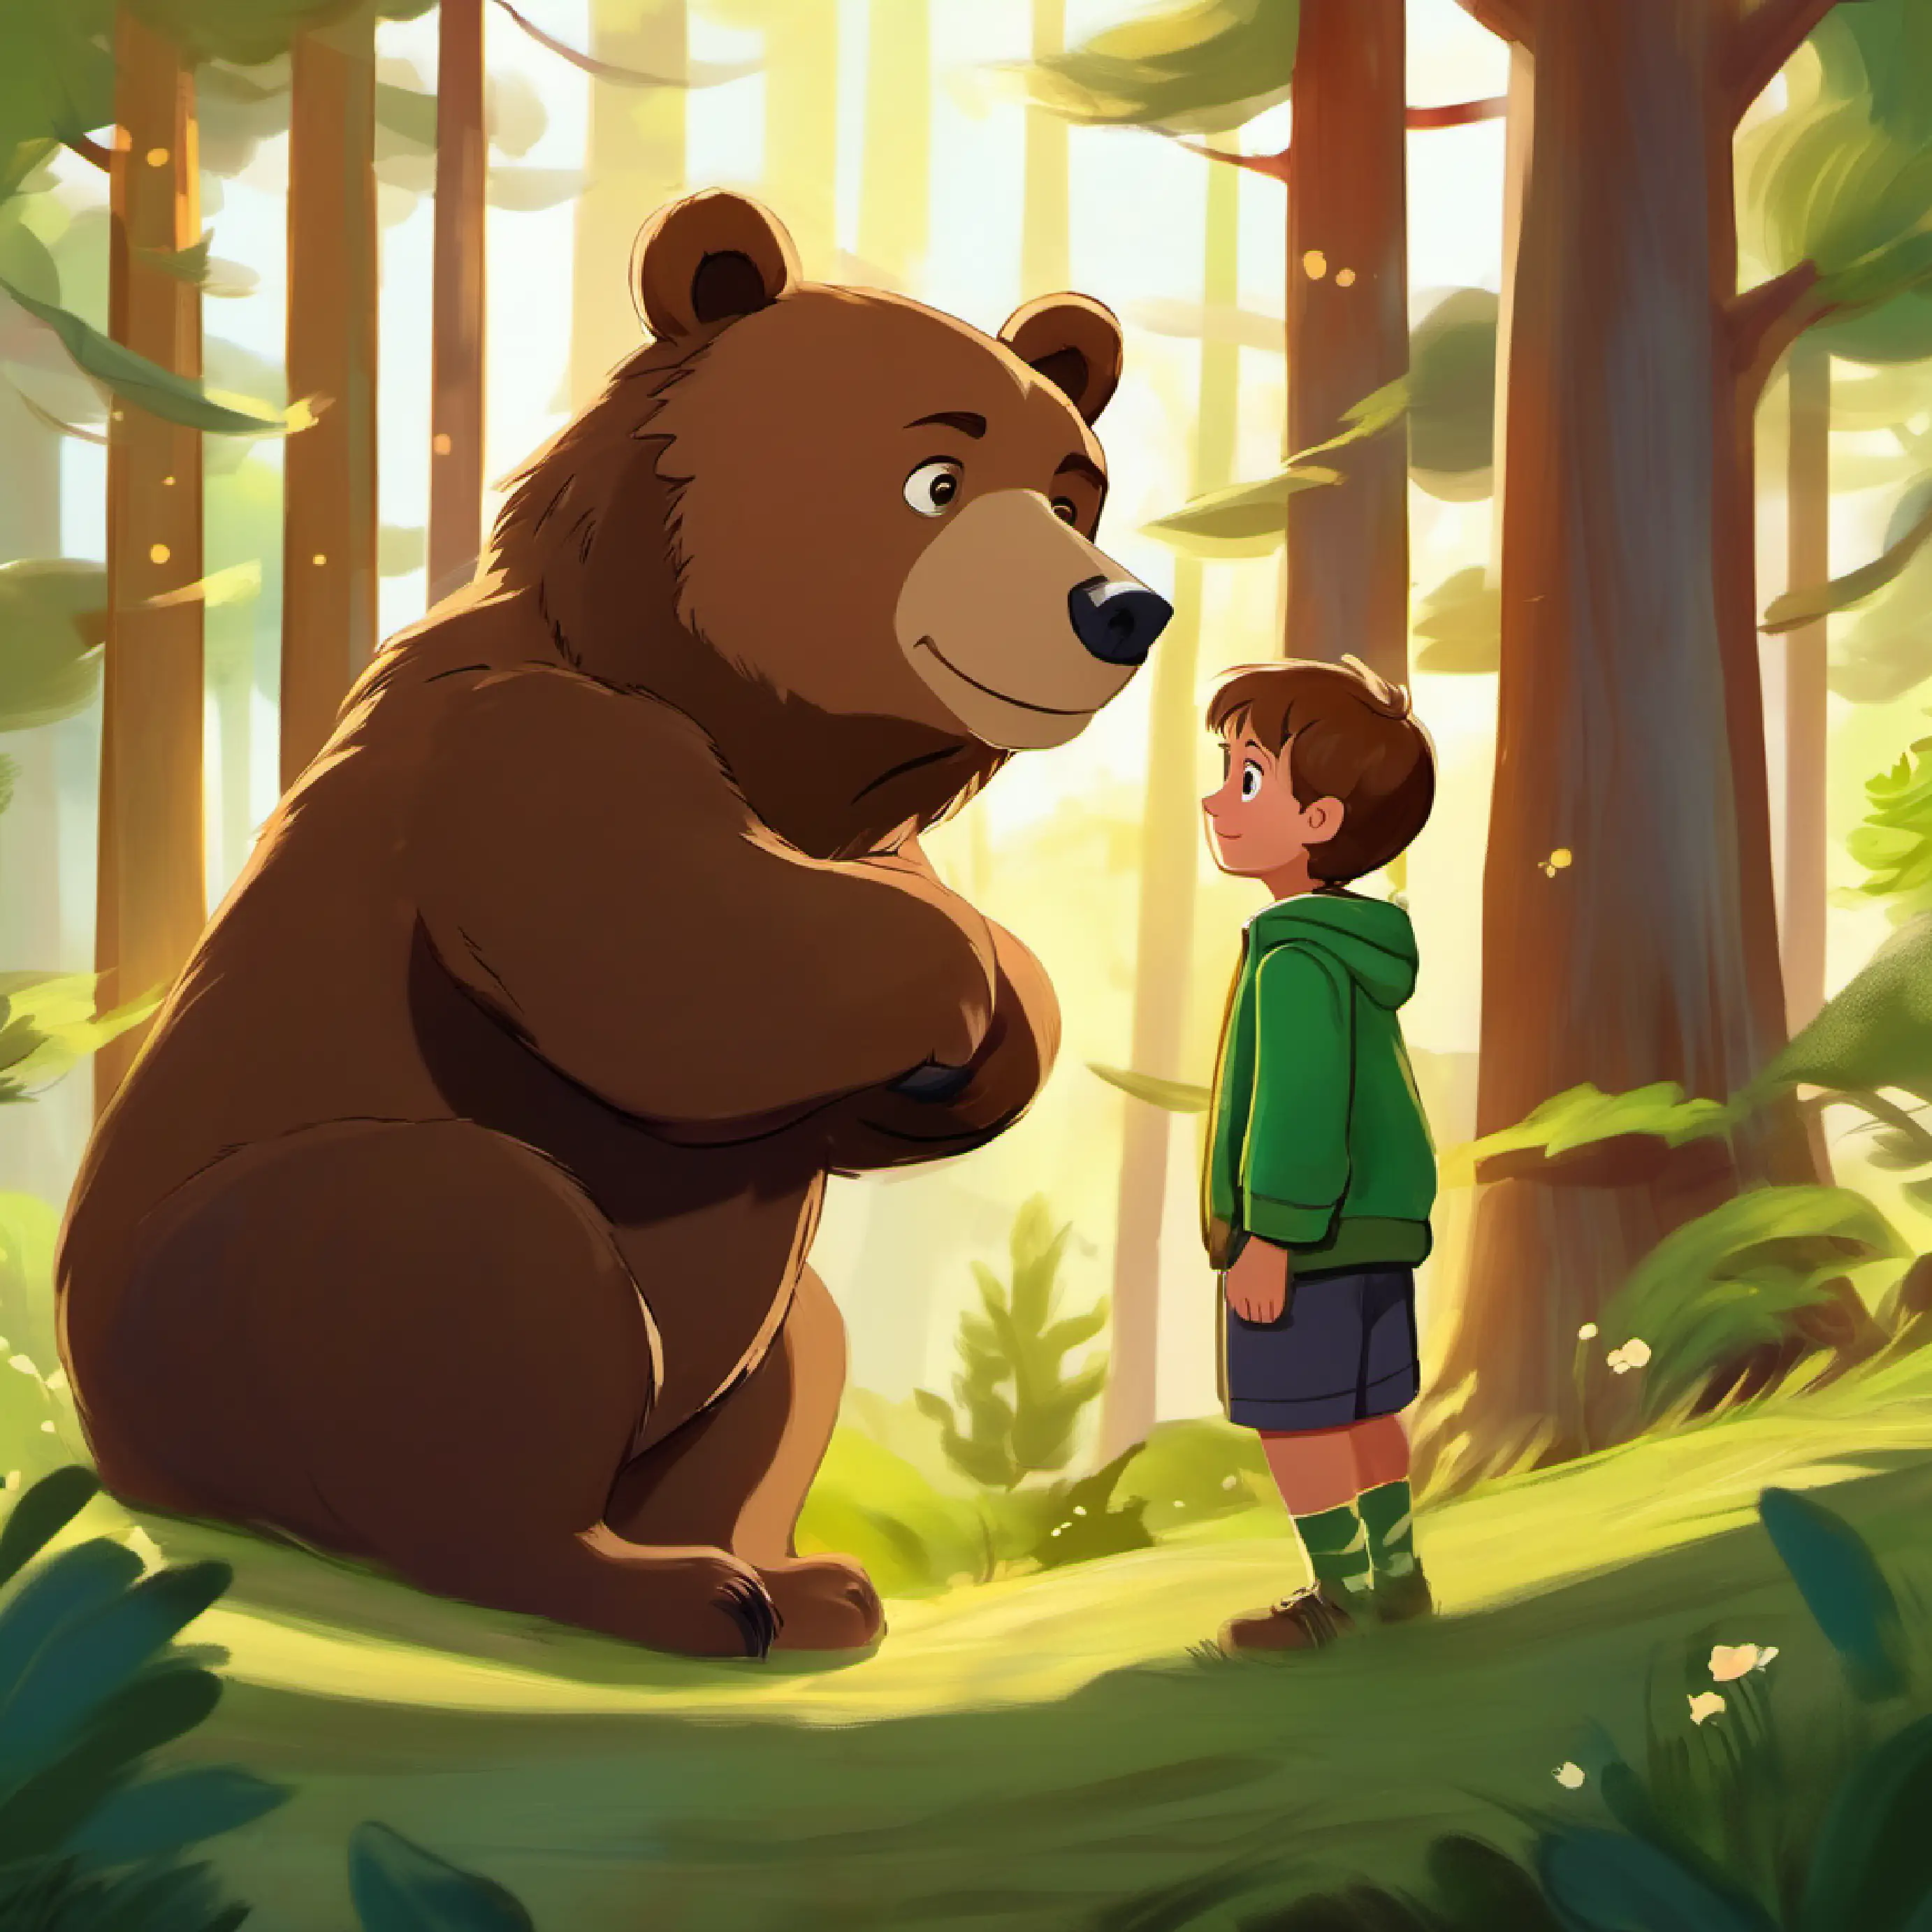 First riddle by Bear, soft brown fur, large, gentle and jolly the bear, answer discovered by Curious boy, short brown hair, green eyes, adventurous spirit